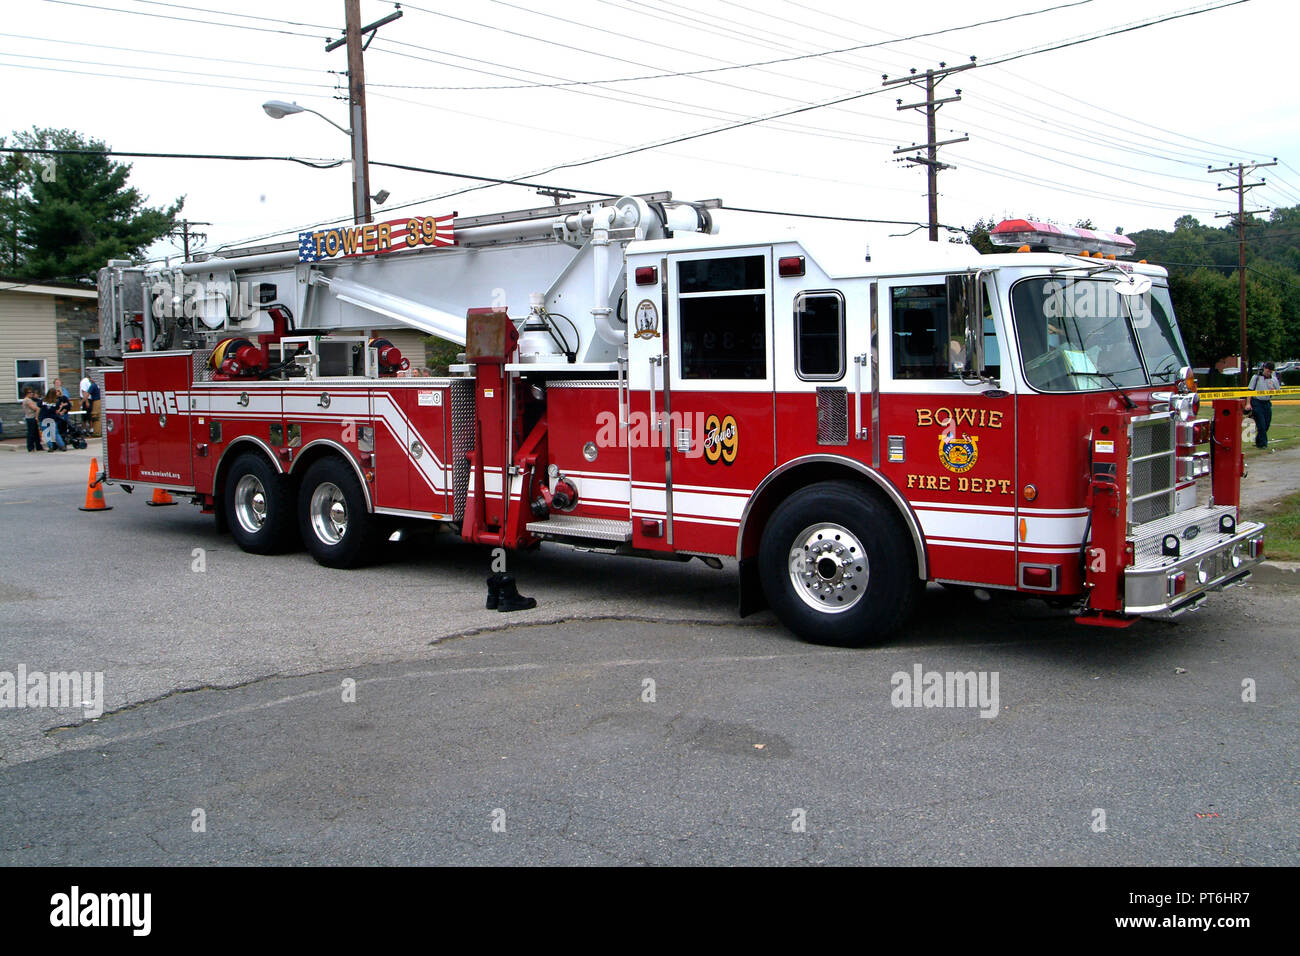 A tower fire truck in Bowie, Md Stock Photo